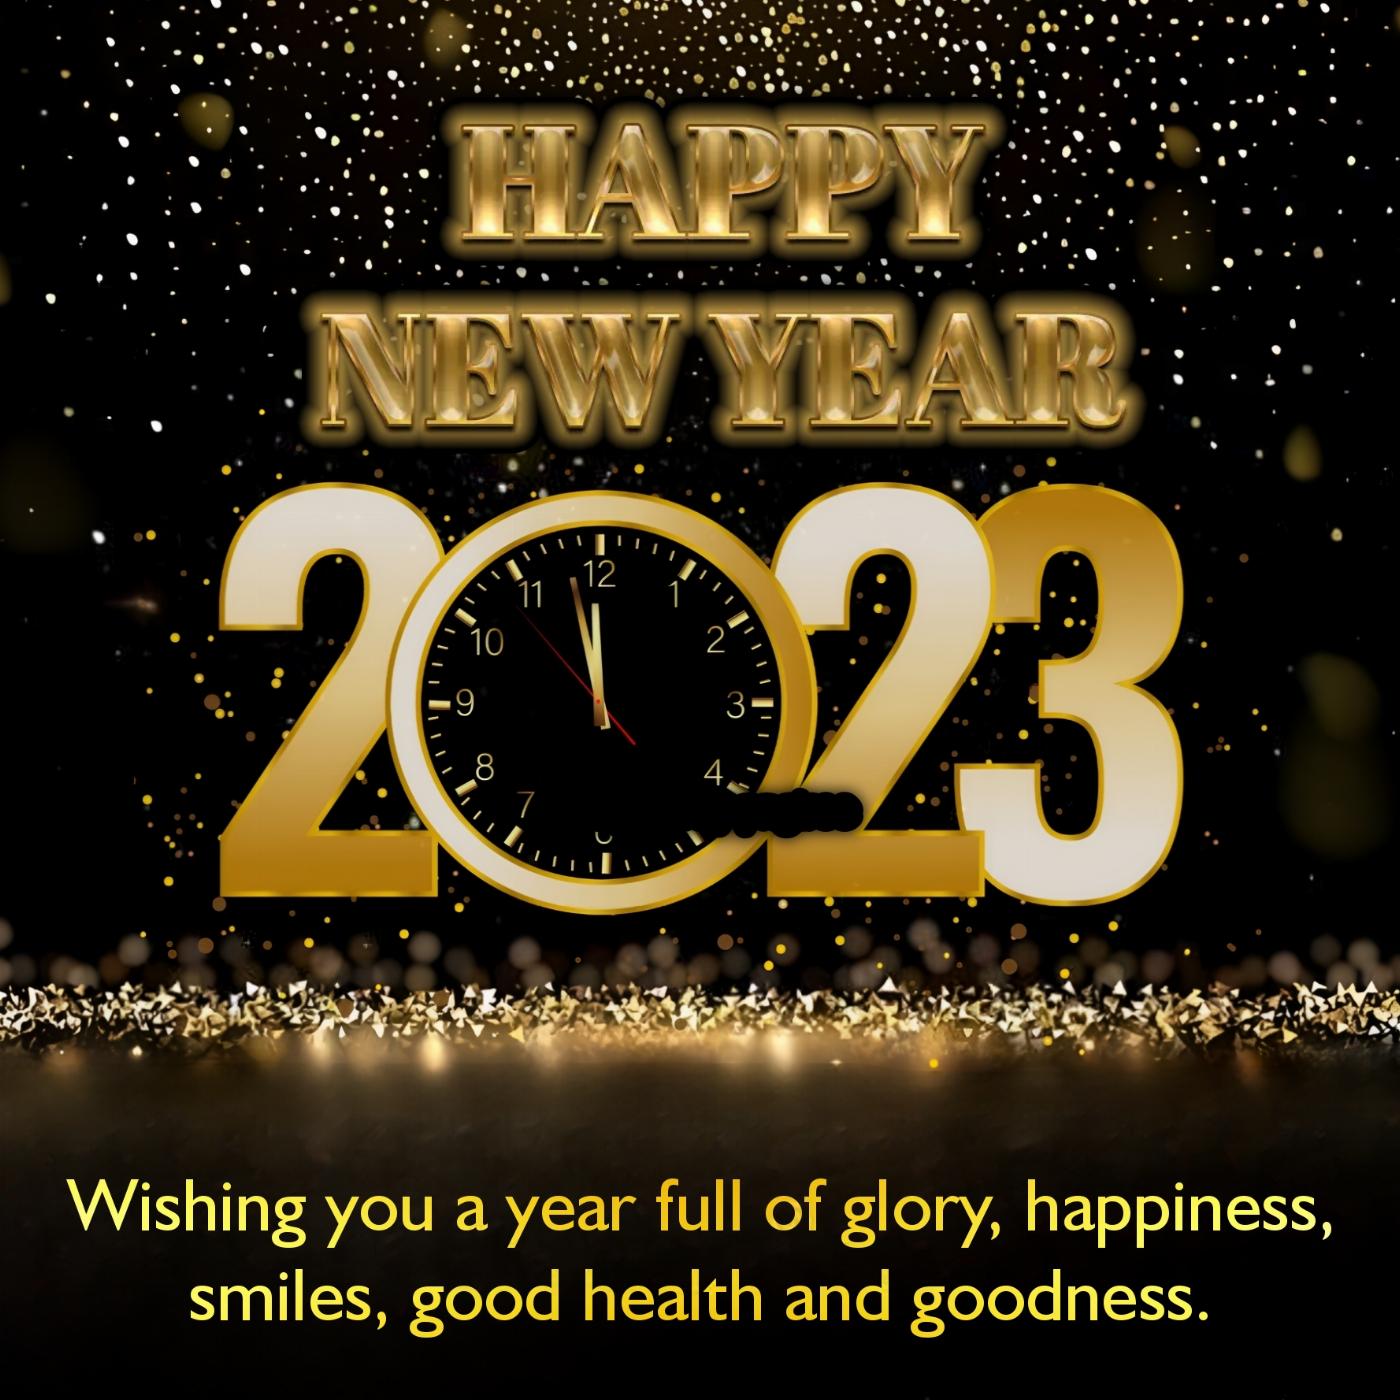 Wishing you a year full of glory happiness smiles